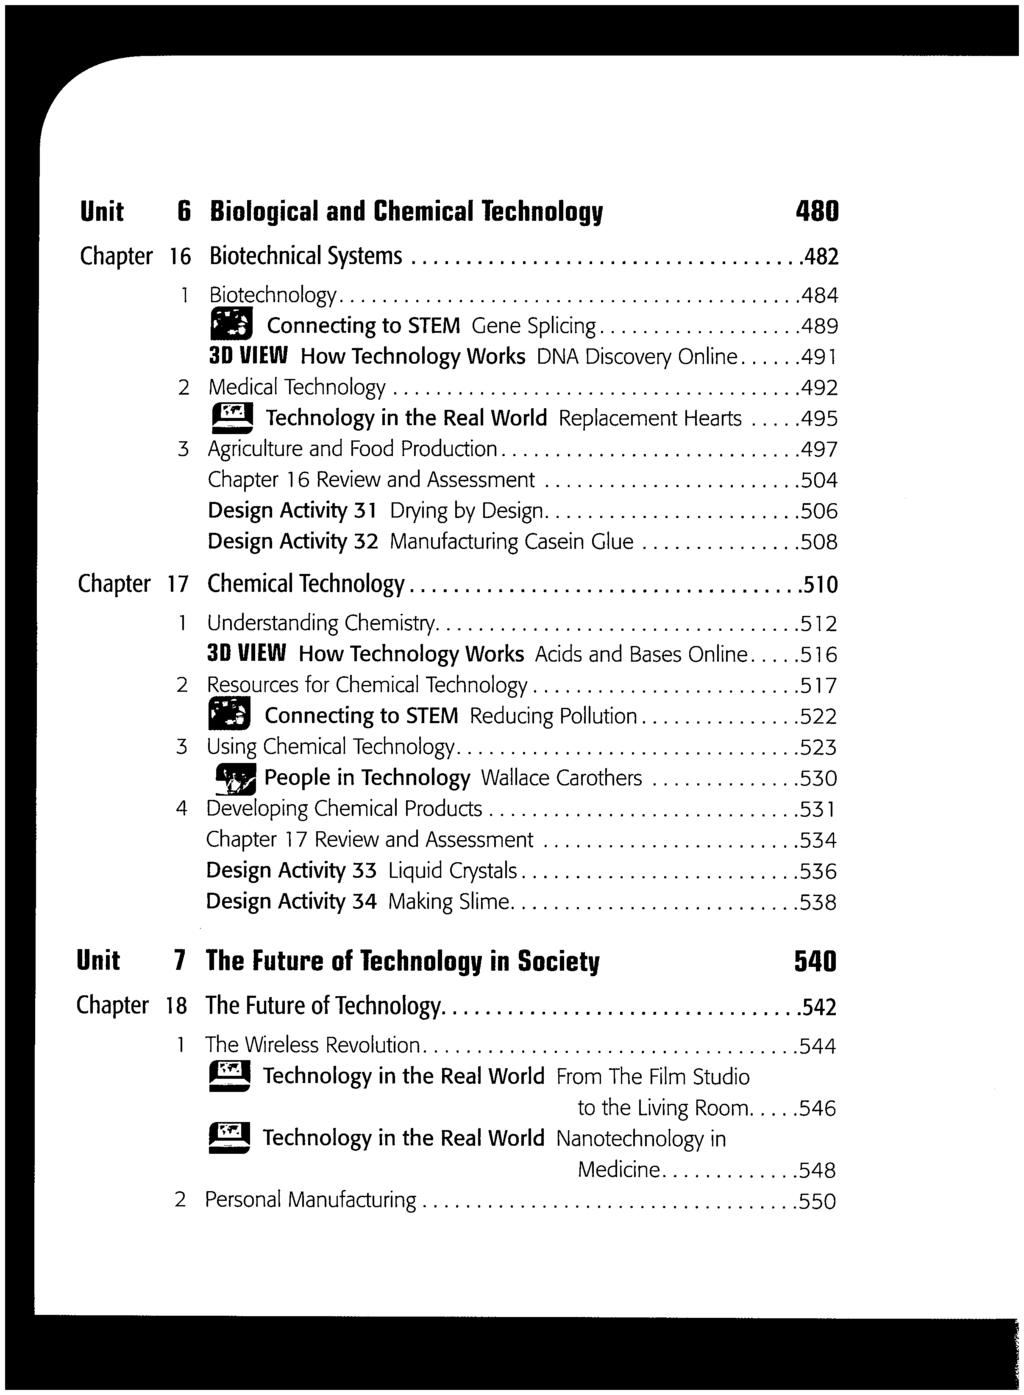 Unit 6 Biological and Chemical Technology 480 Chapter 16 Biotechnical Systems 482 1 Biotechnology 484 Sfi Connecting to STEM Gene Splicing 489 3D UIEW How Technology Works DNA Discovery Online 491 2